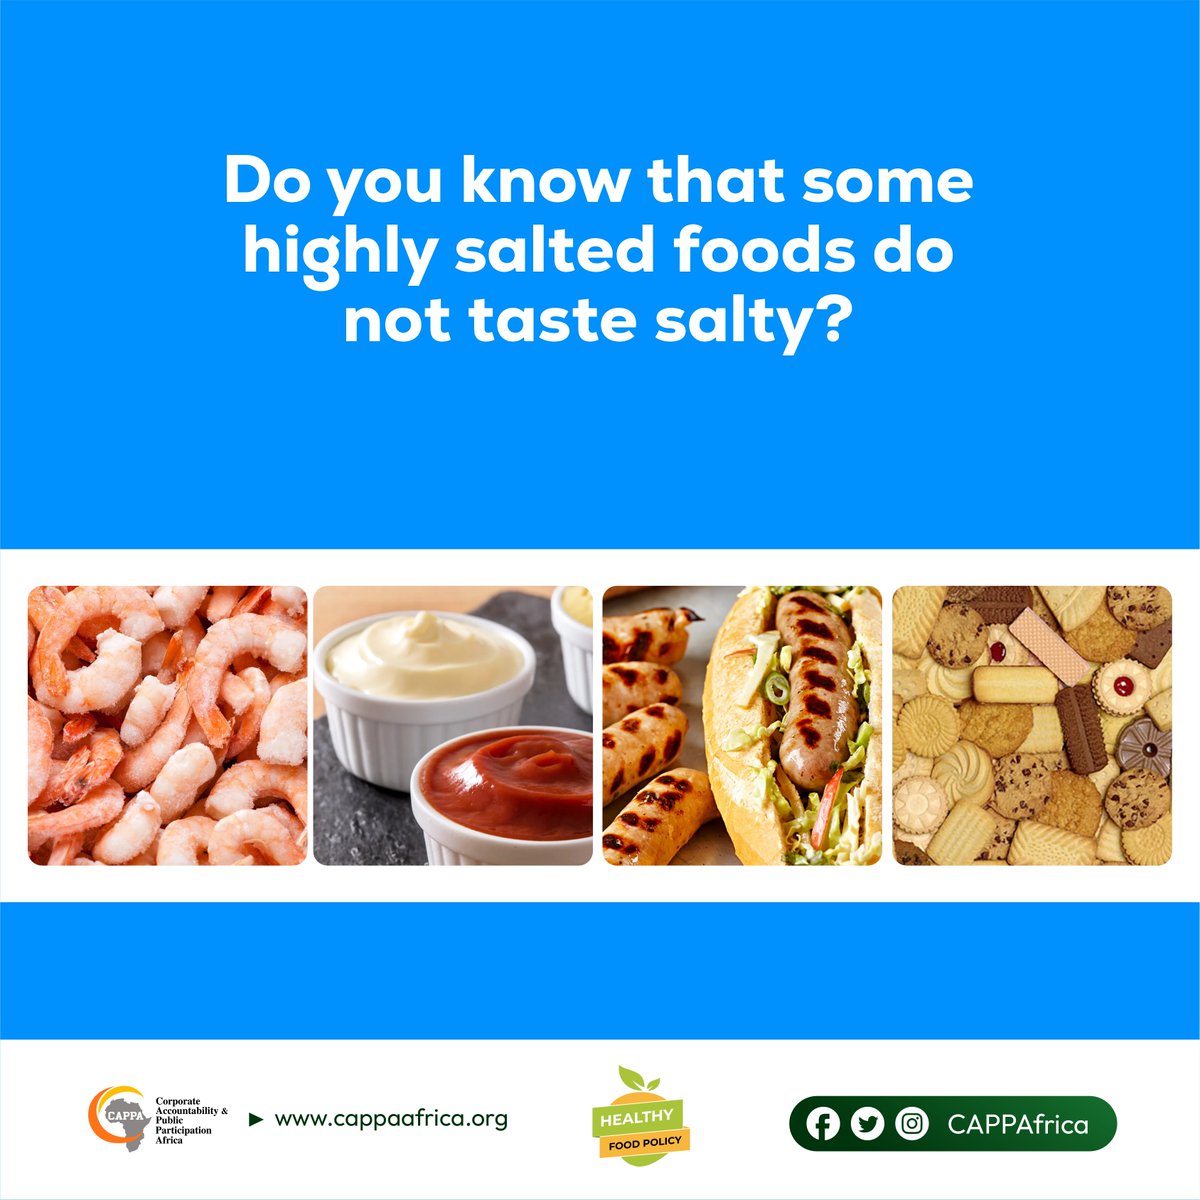 Foods like bread, snacks, biscuits, confectionaries, mayonnaise, ketchup, sauces, and processed meat products may not taste salty but they contain a high quantity of salt and sodium. Avoid eating too much of these foods. #SaltReduction #Healthydiets